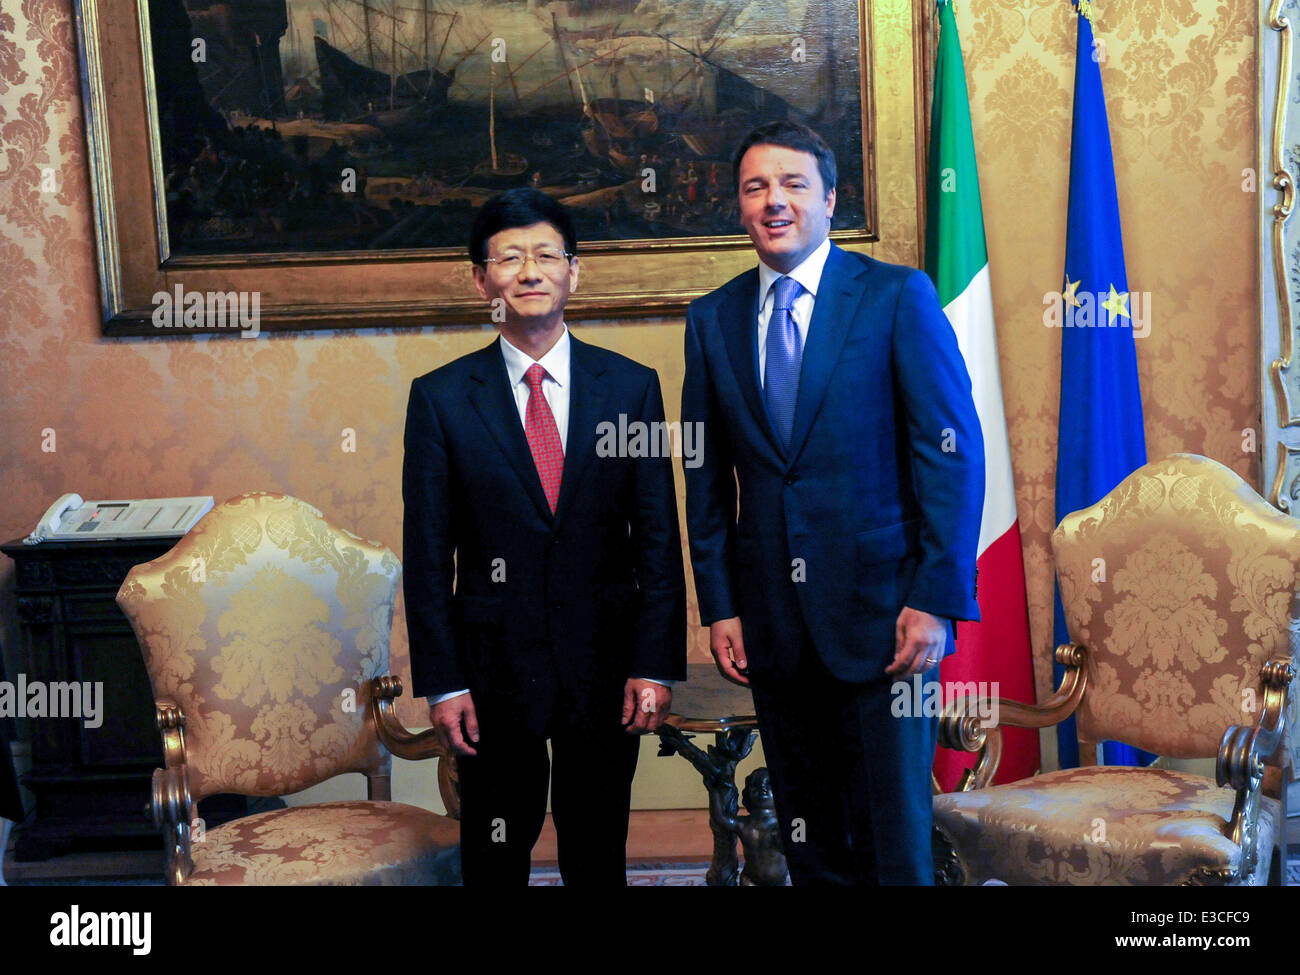 (140623) -- ROME, June 23, 2014 (Xinhua) -- Meng Jianzhu (L), head of the Commission for Political and Legal Affairs of the Communist Party of China (CPC) Central Committee and a member of the Political Bureau of the CPC Central Committee, meets with Italian Prime Minister Matteo Renzi in Rome, Italy, June 23, 2014. (Xinhua/Xu Nizhi) (srb) Stock Photo